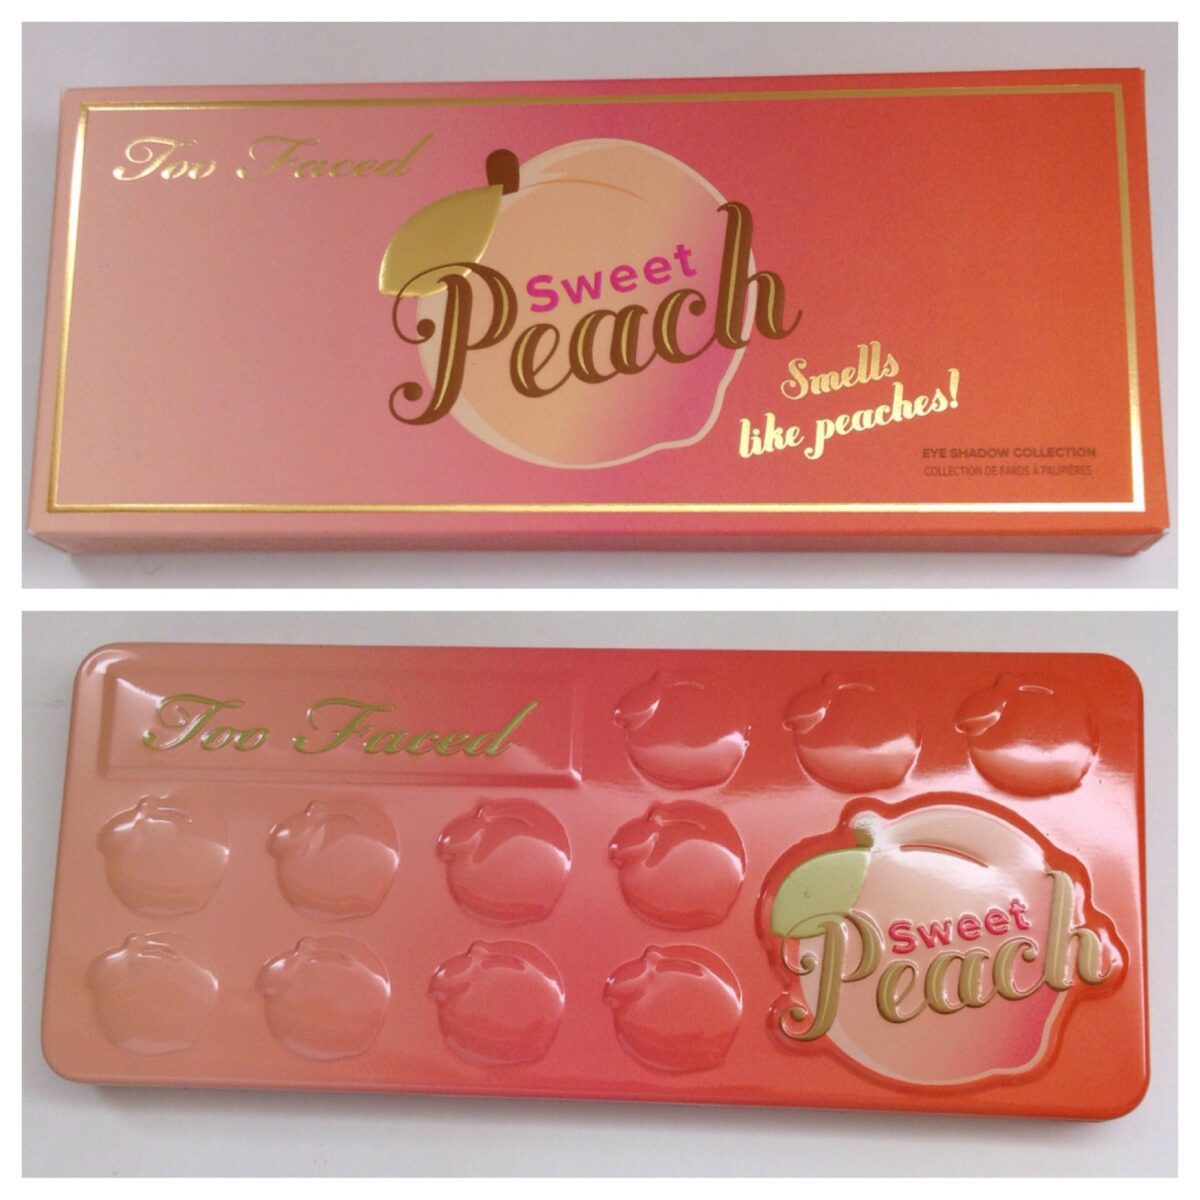 Two-faced-sweet-peach-packaging-box-and-tin-box